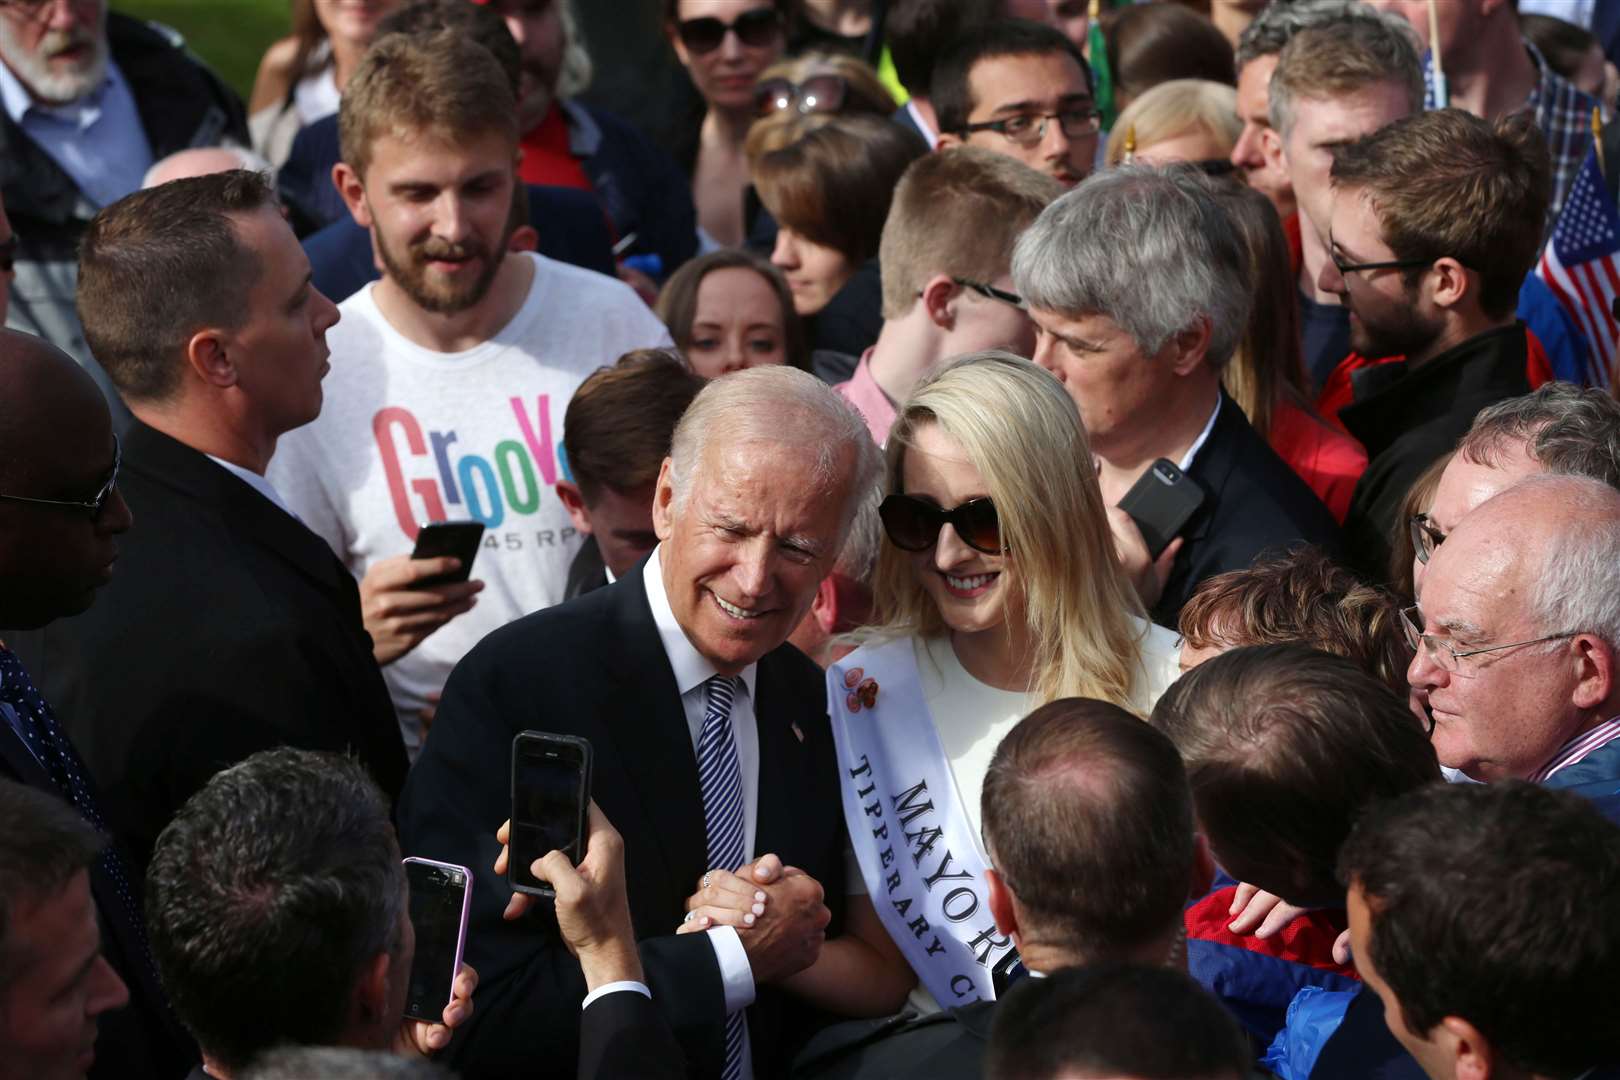 Joe Biden greets crowds in Dublin during a visit to Ireland (Niall Carson/PA)